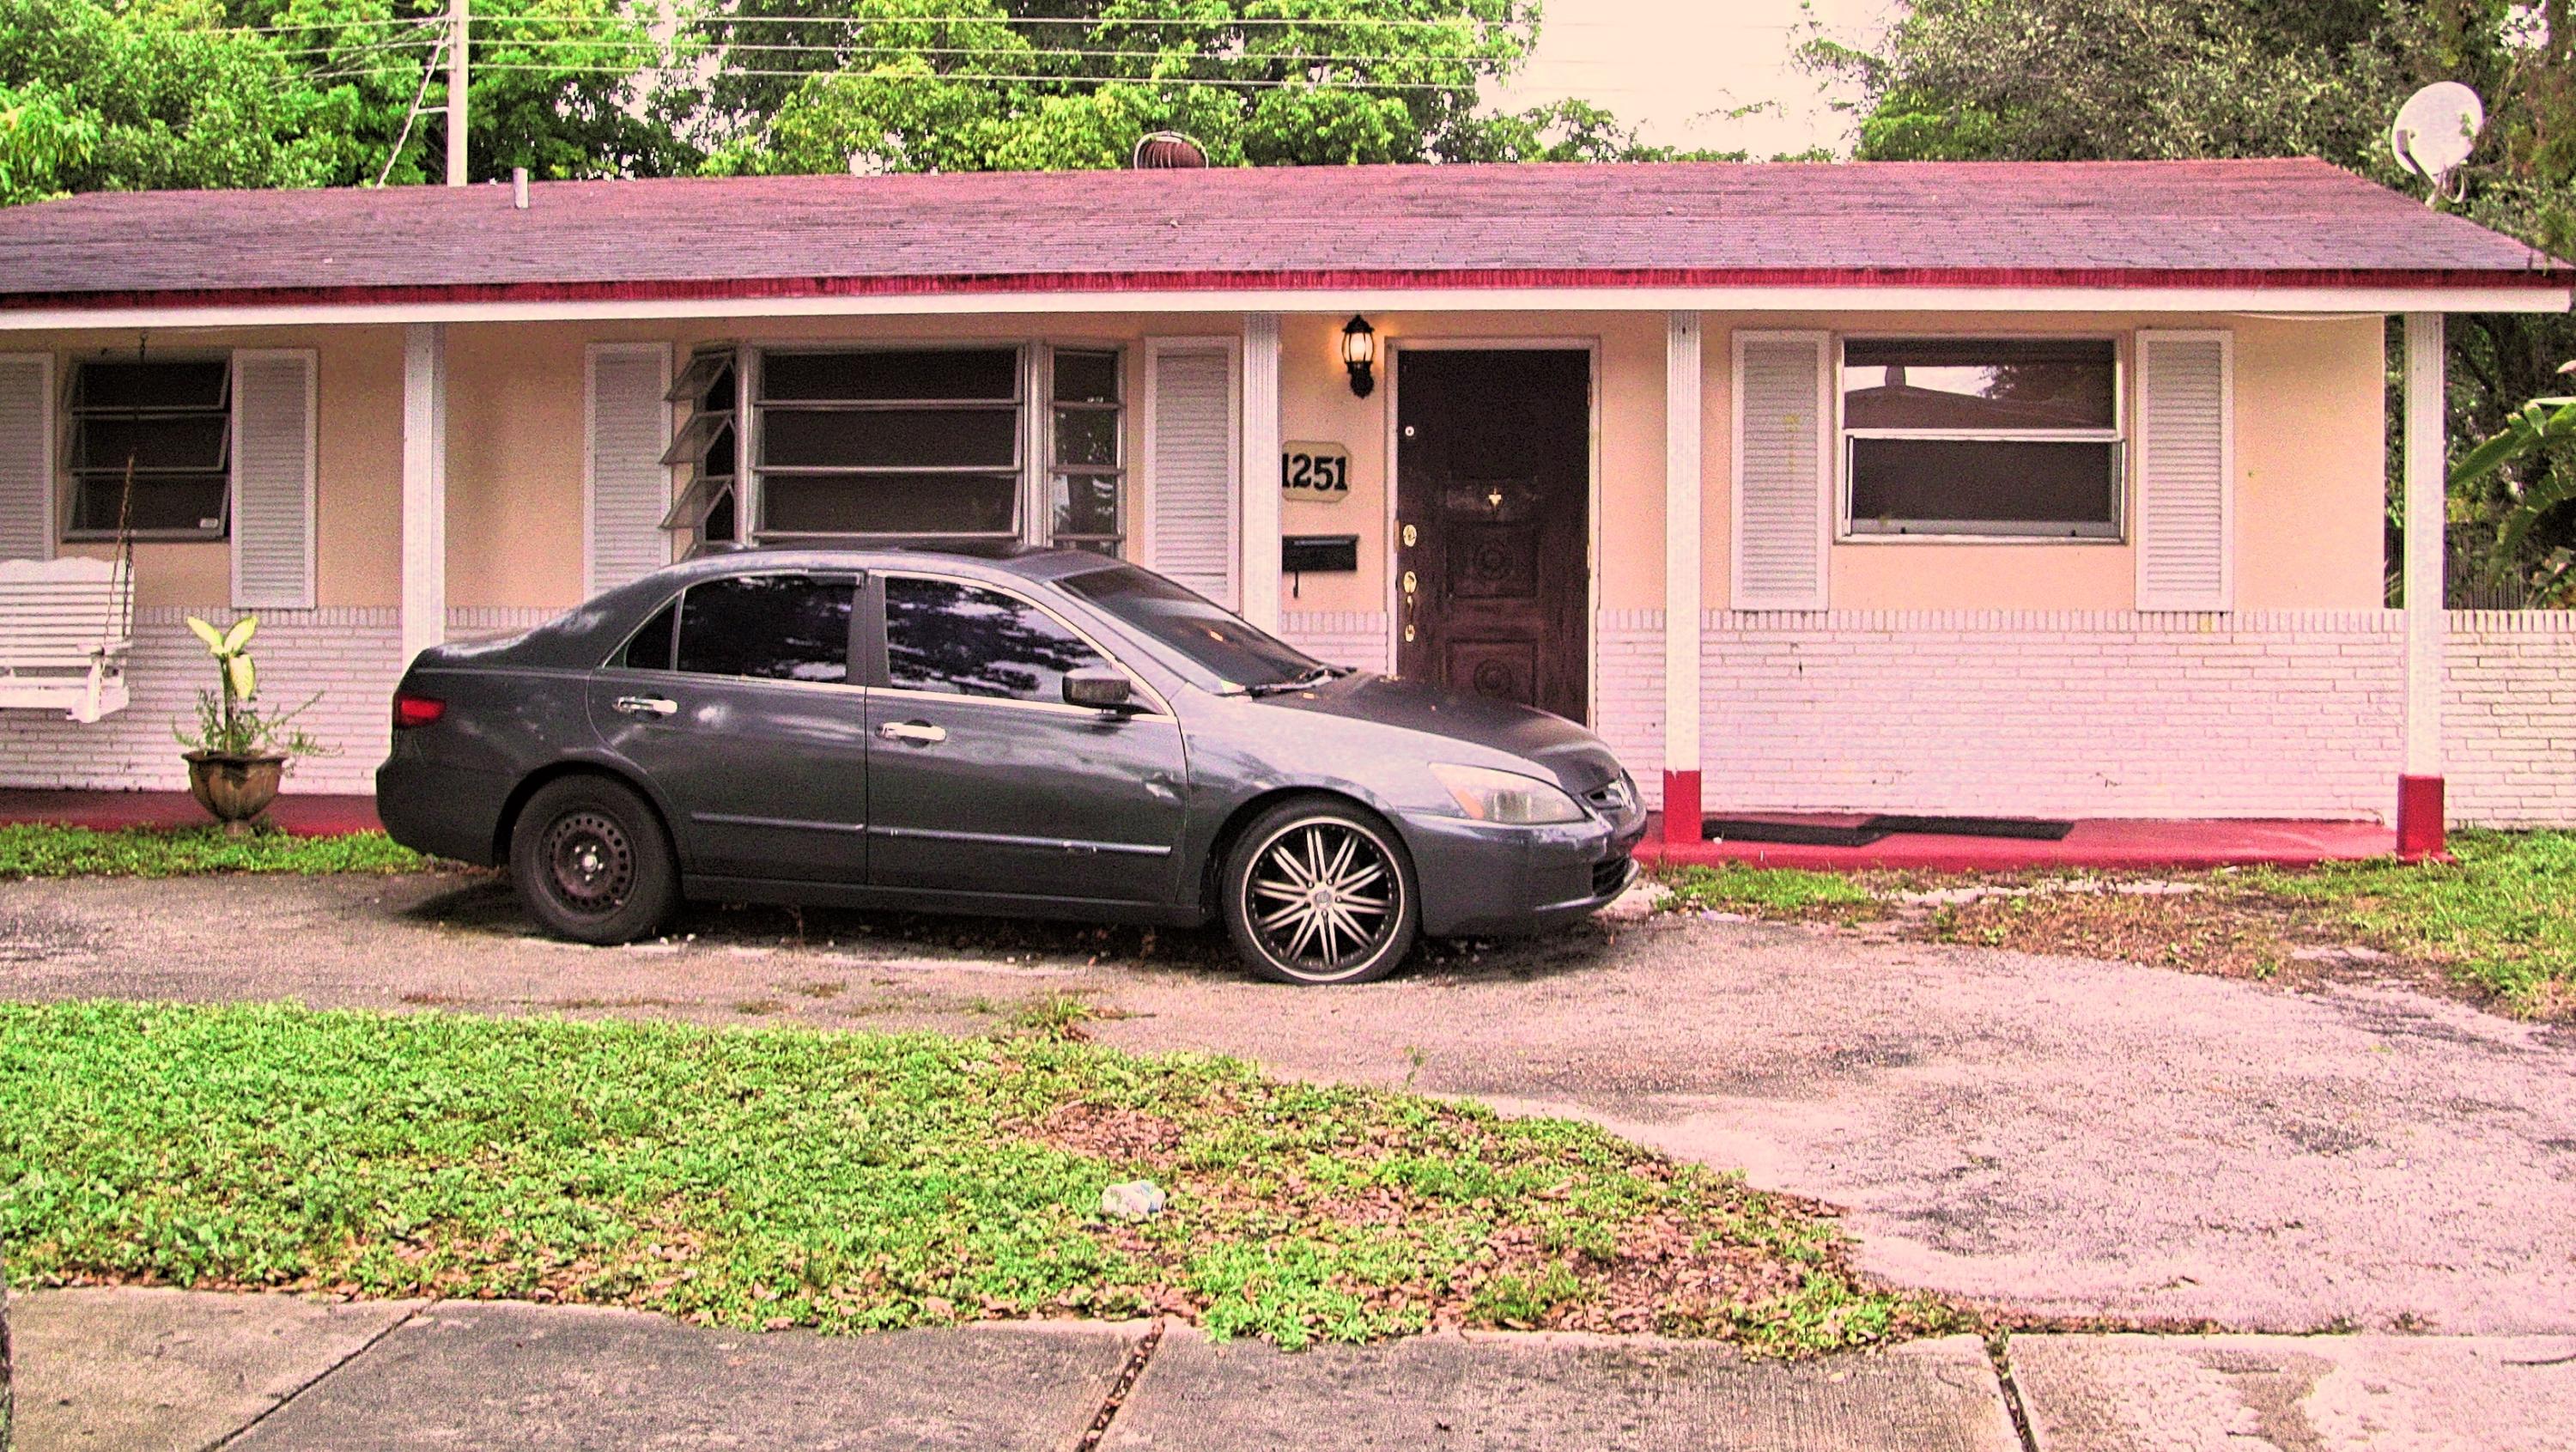 a view of a car parked in front of a house